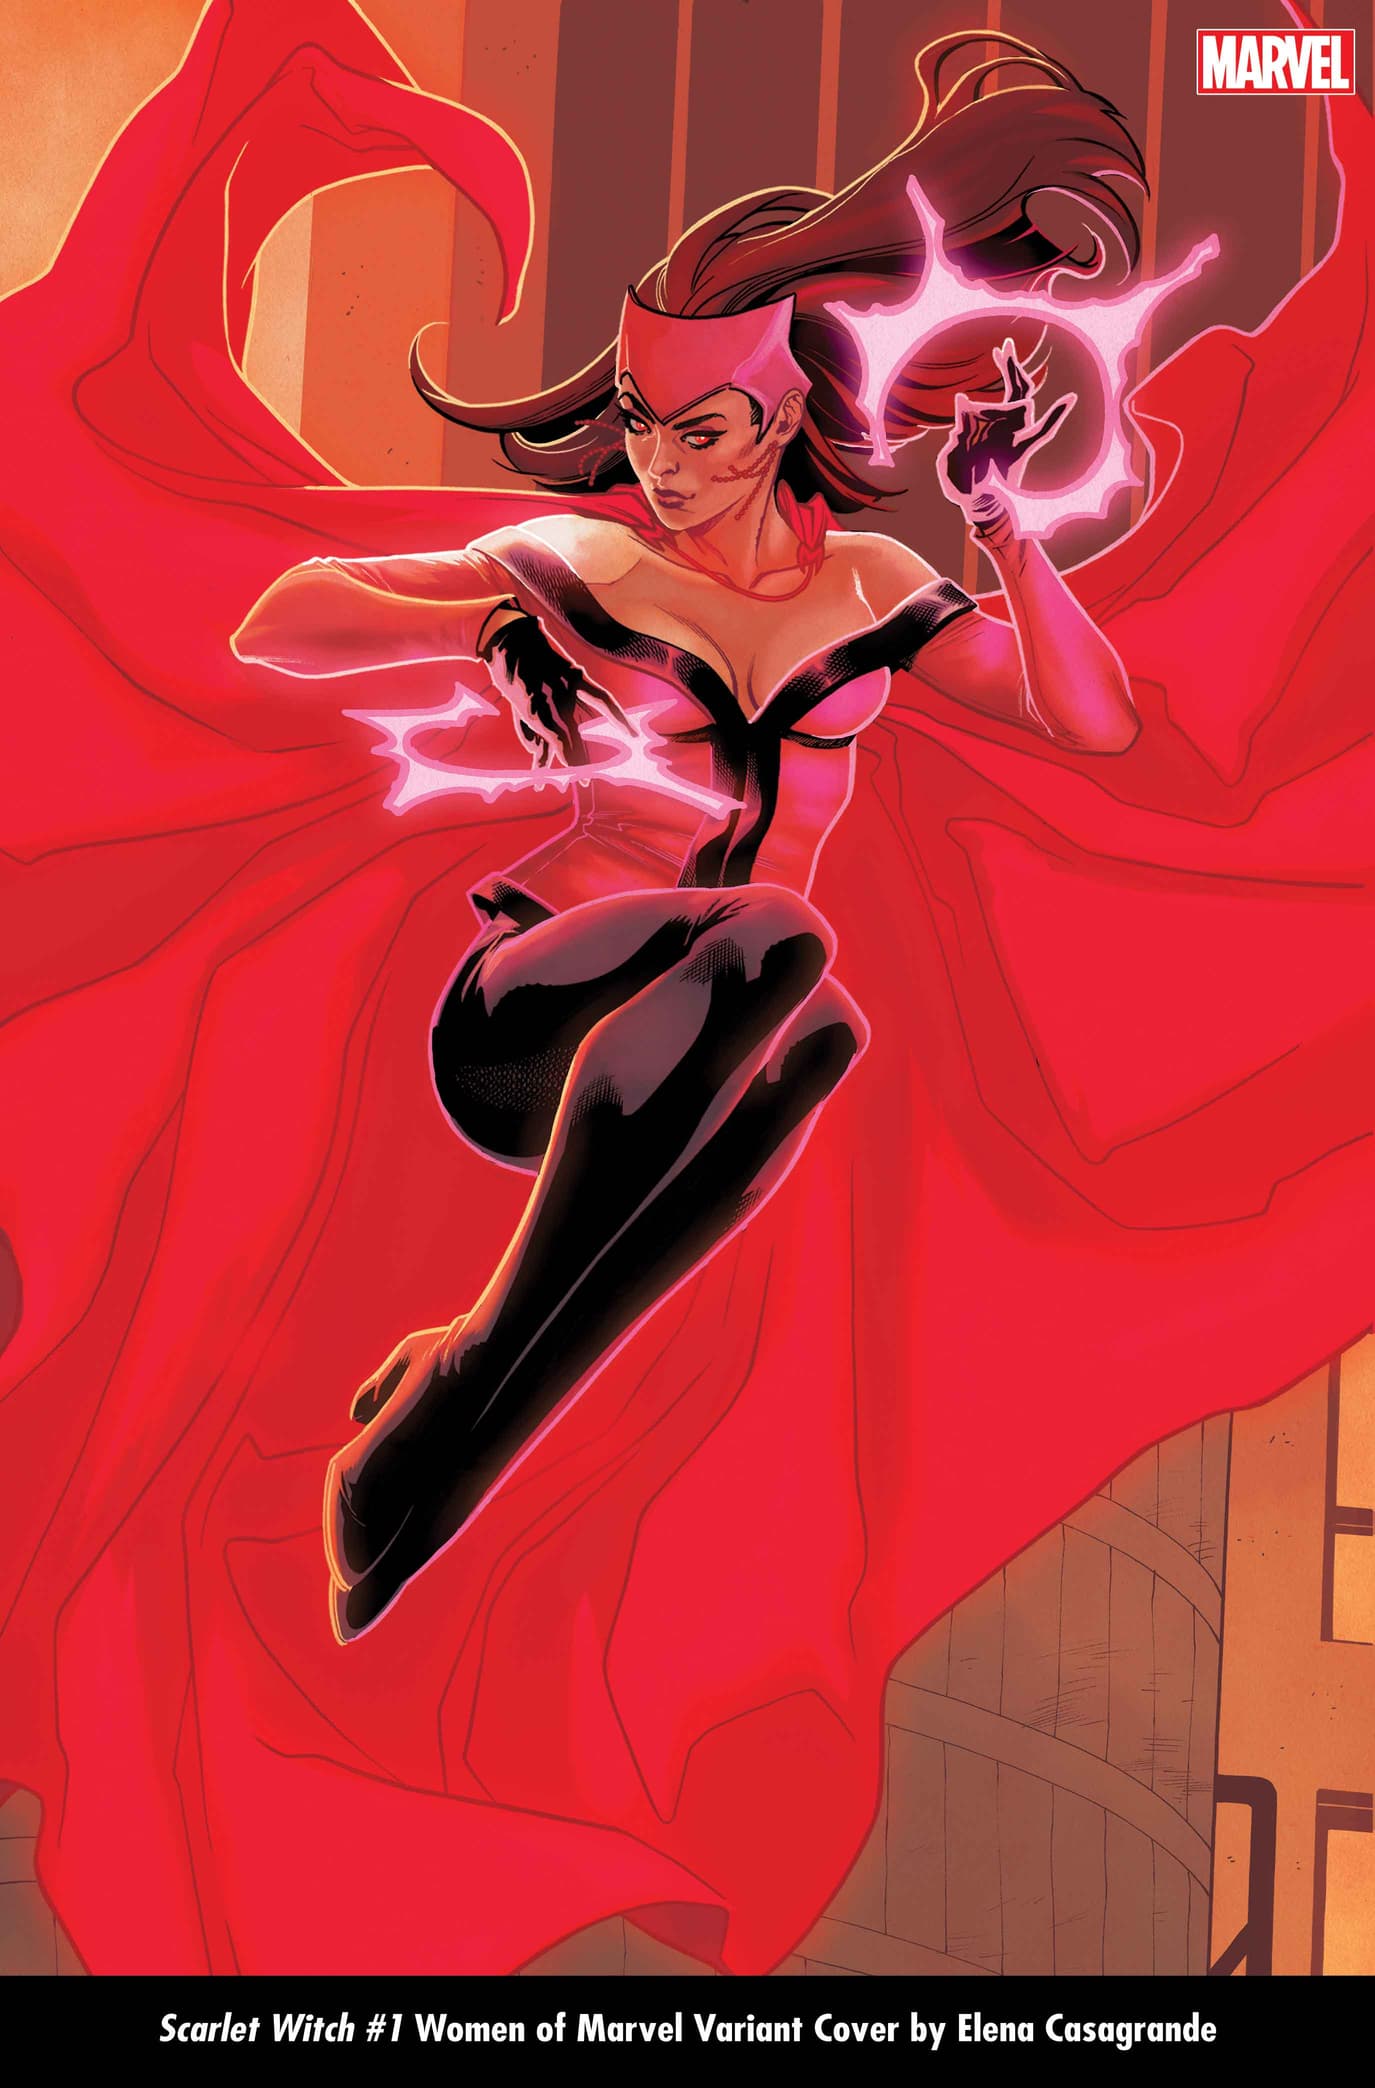 SCARLET WITCH #1 WOMEN OF MARVEL VARIANT COVER BY ELENA CASAGRANDE